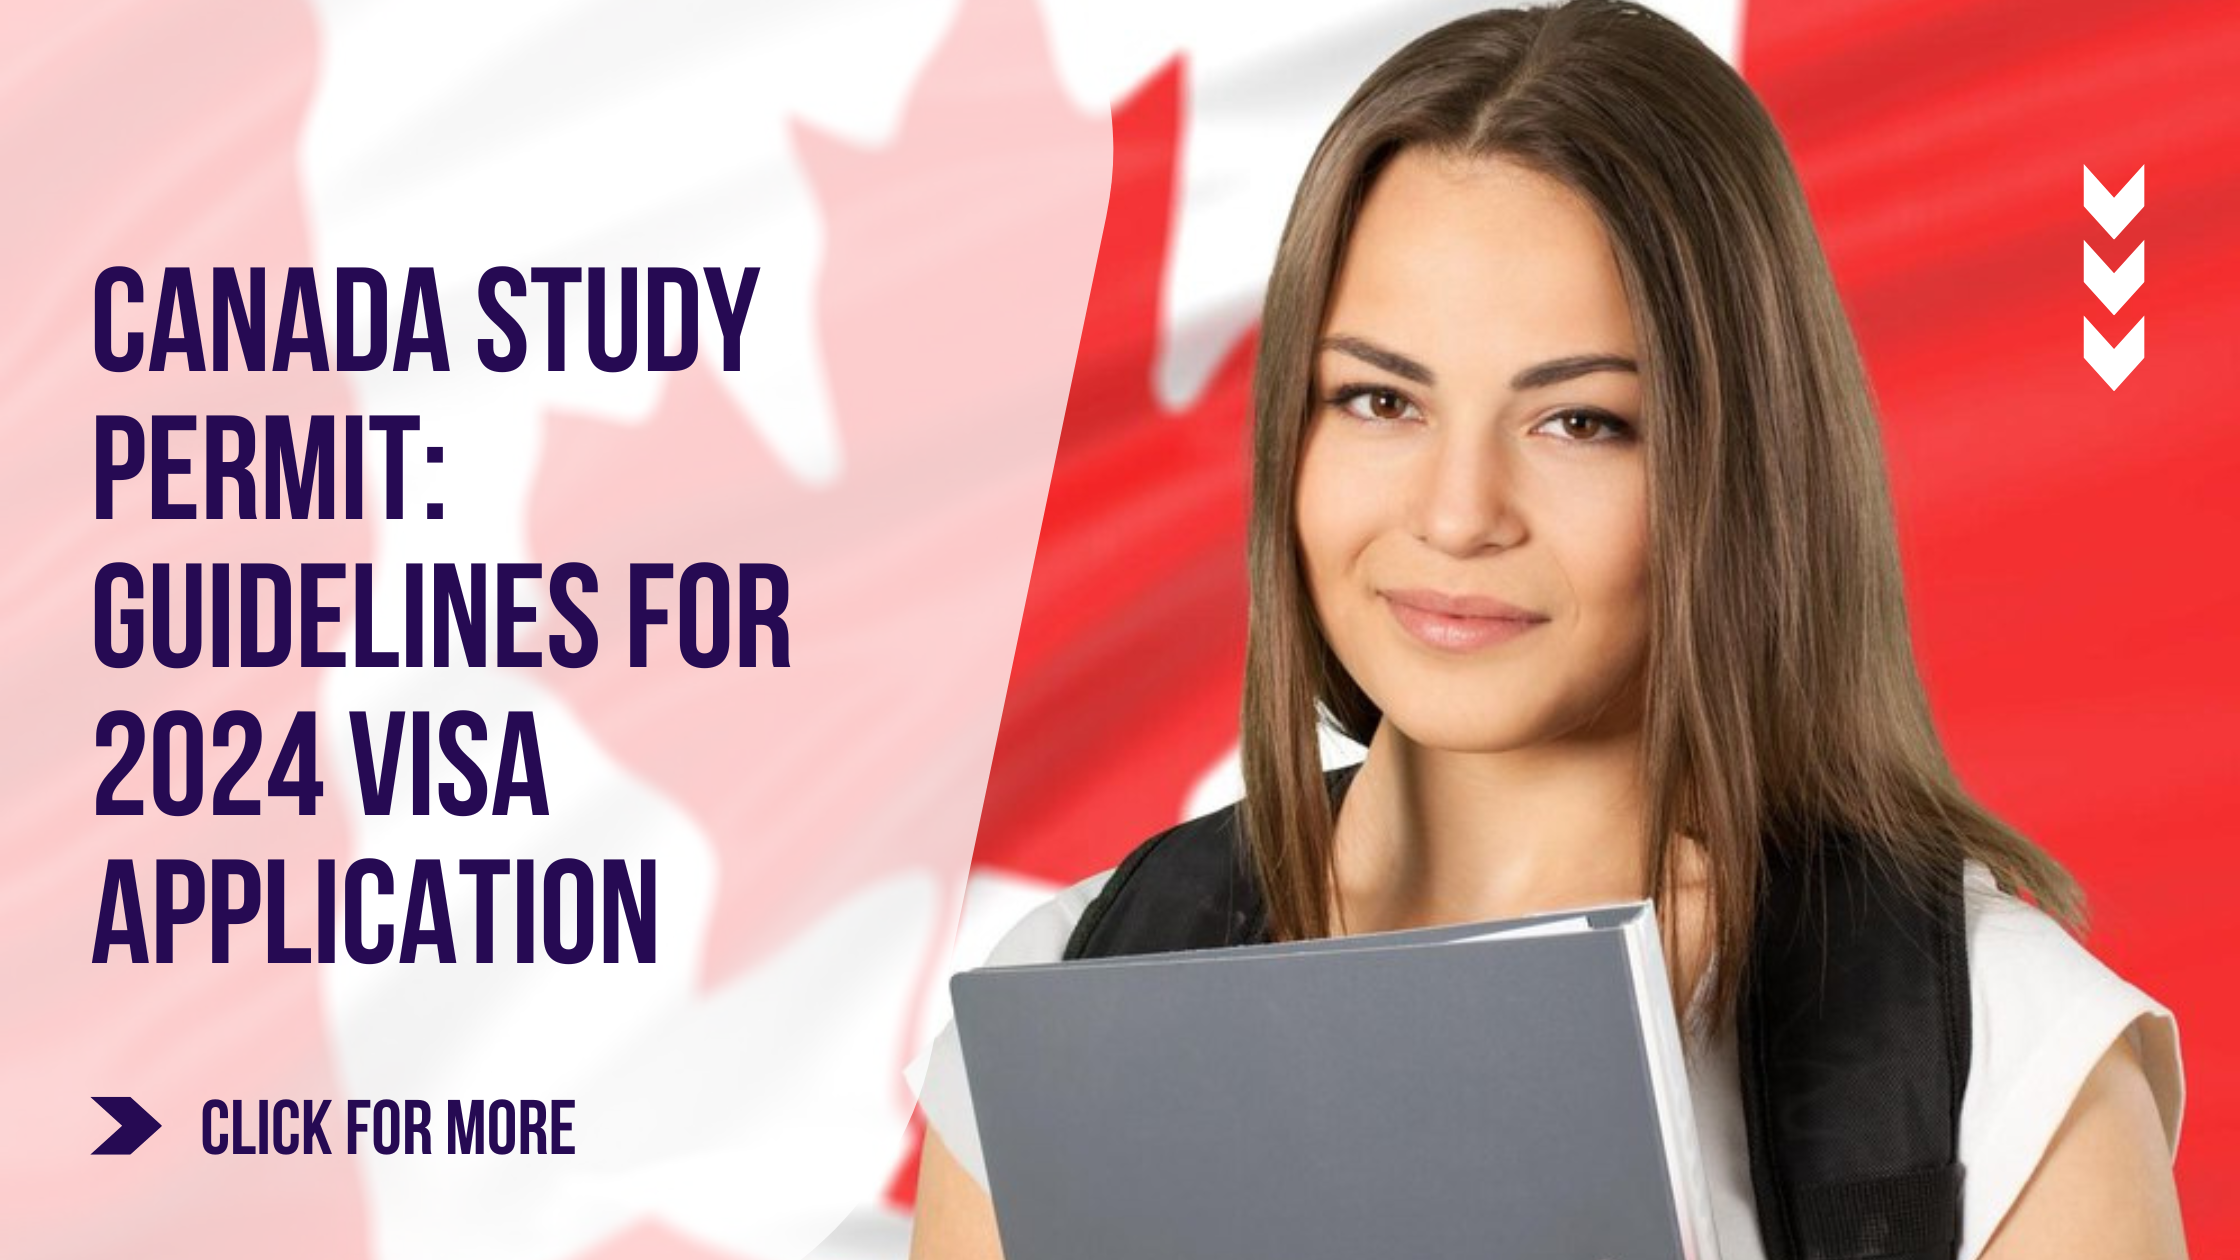 Canada Study Permit: Guidelines For 2024 Visa Application